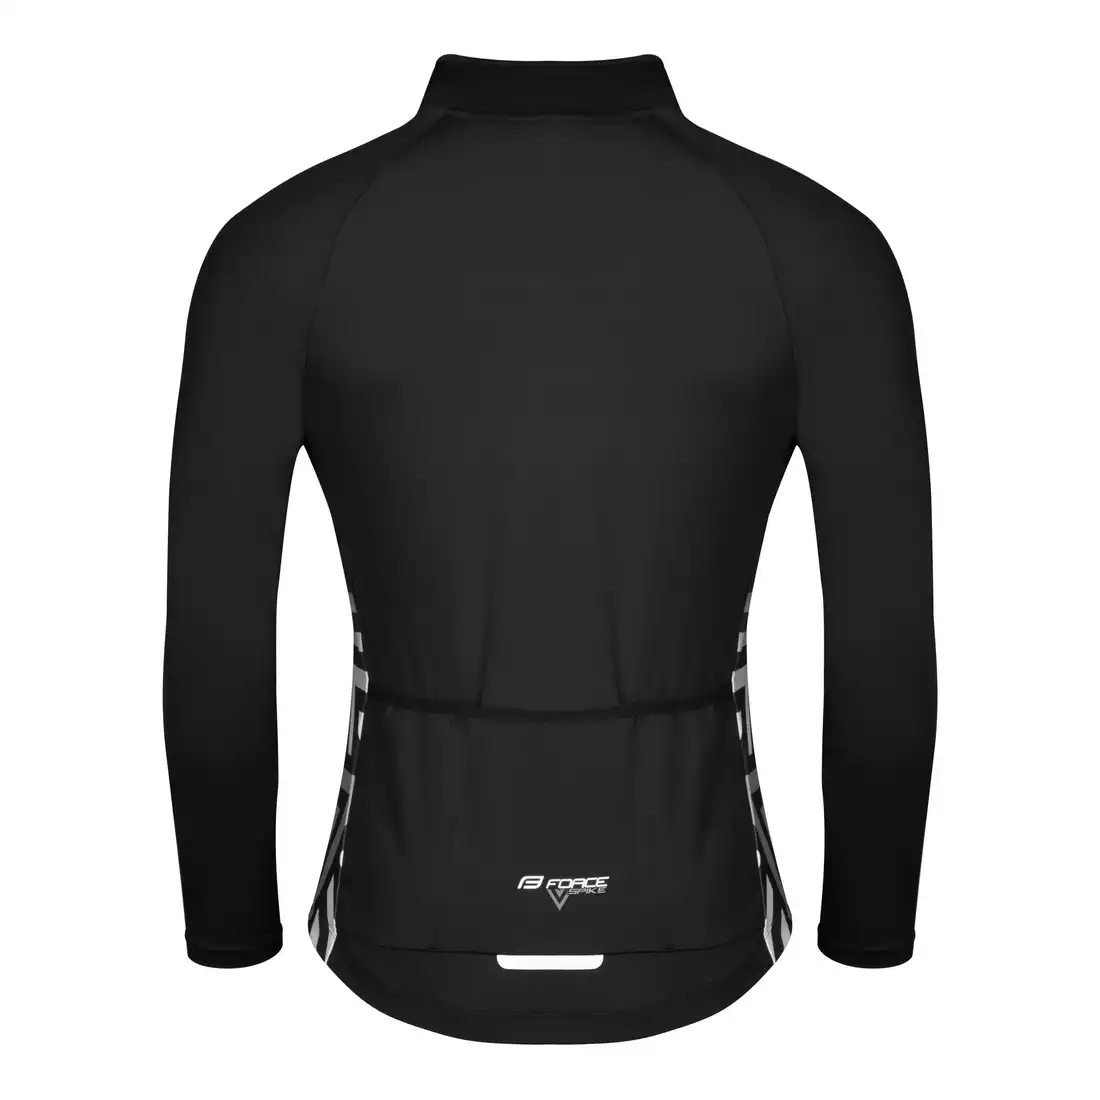 FORCE SPIKE long sleeve cycling jersey, black and white